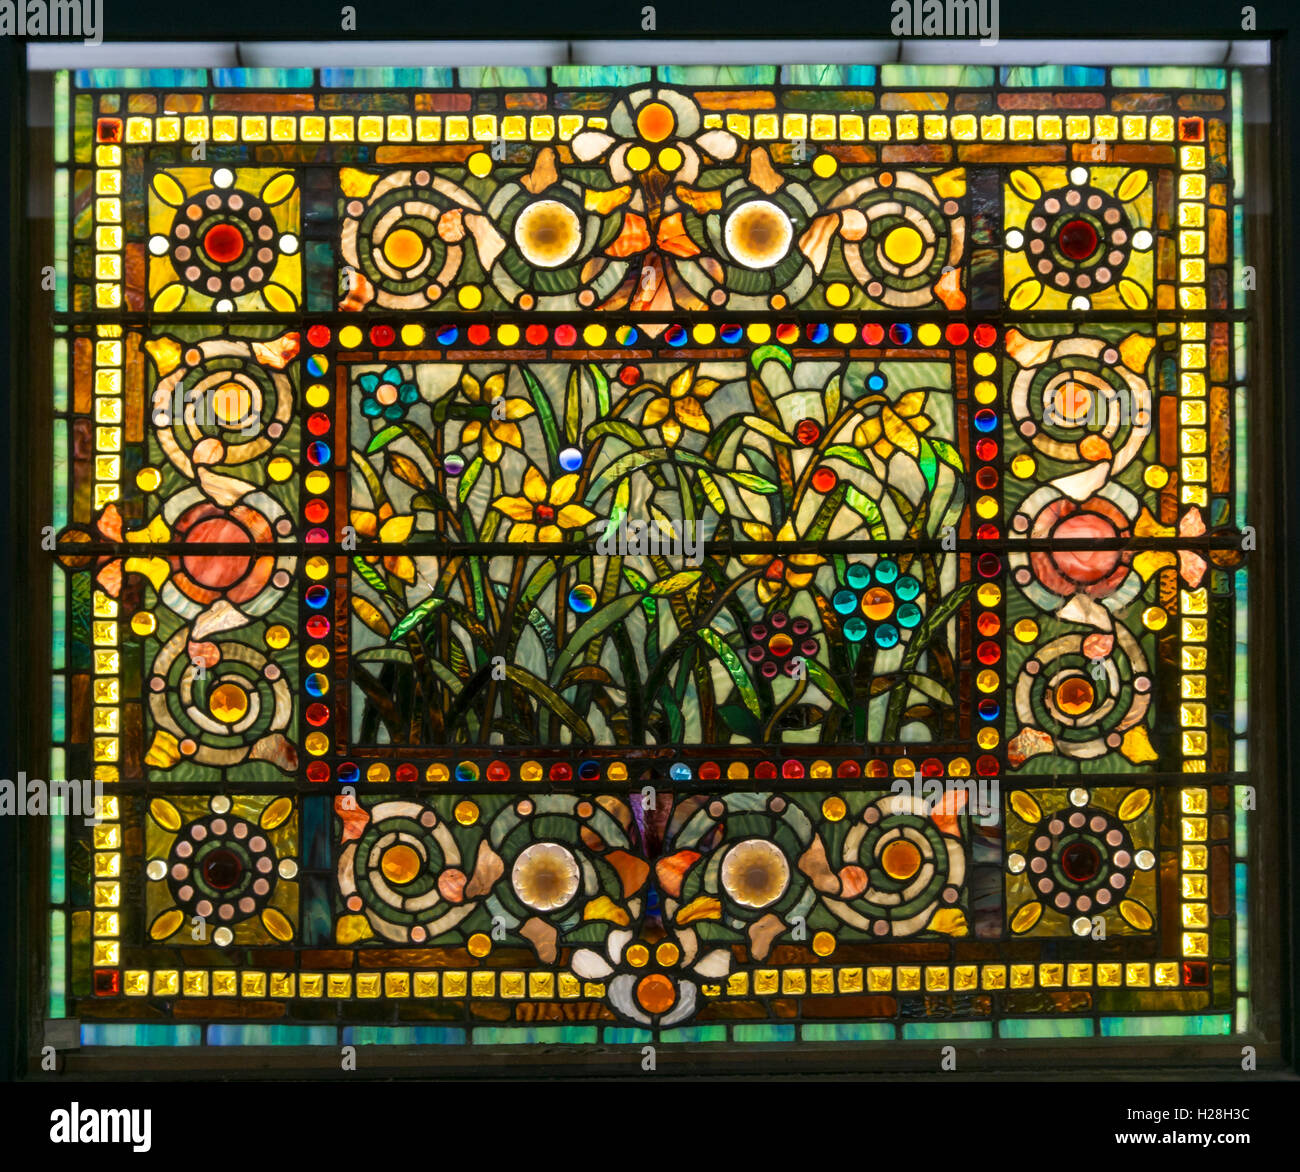 19th century American Garden of Jewels stained glass by an unknown designer and fabricator. Stock Photo